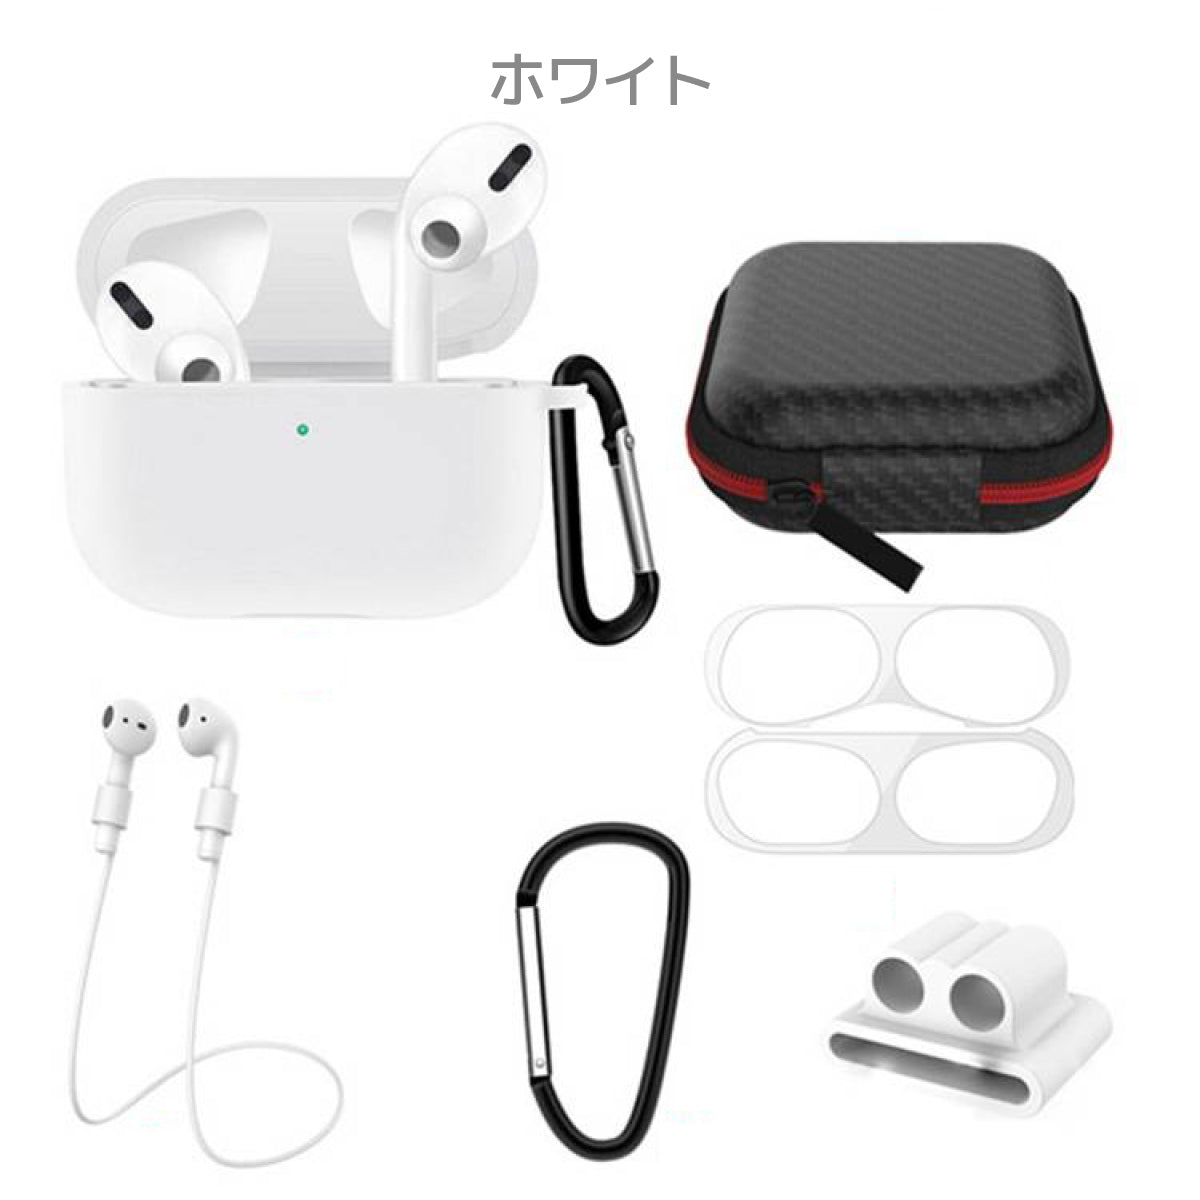 AirPods3 AirPodsPro ケース シリコン 収納ケース付き 6点セット エアーポッズプロ 落下防止 耐衝撃 吸収 装着充電可能 第3世代 第2世代 エアーポッズプロ 黒 白 青